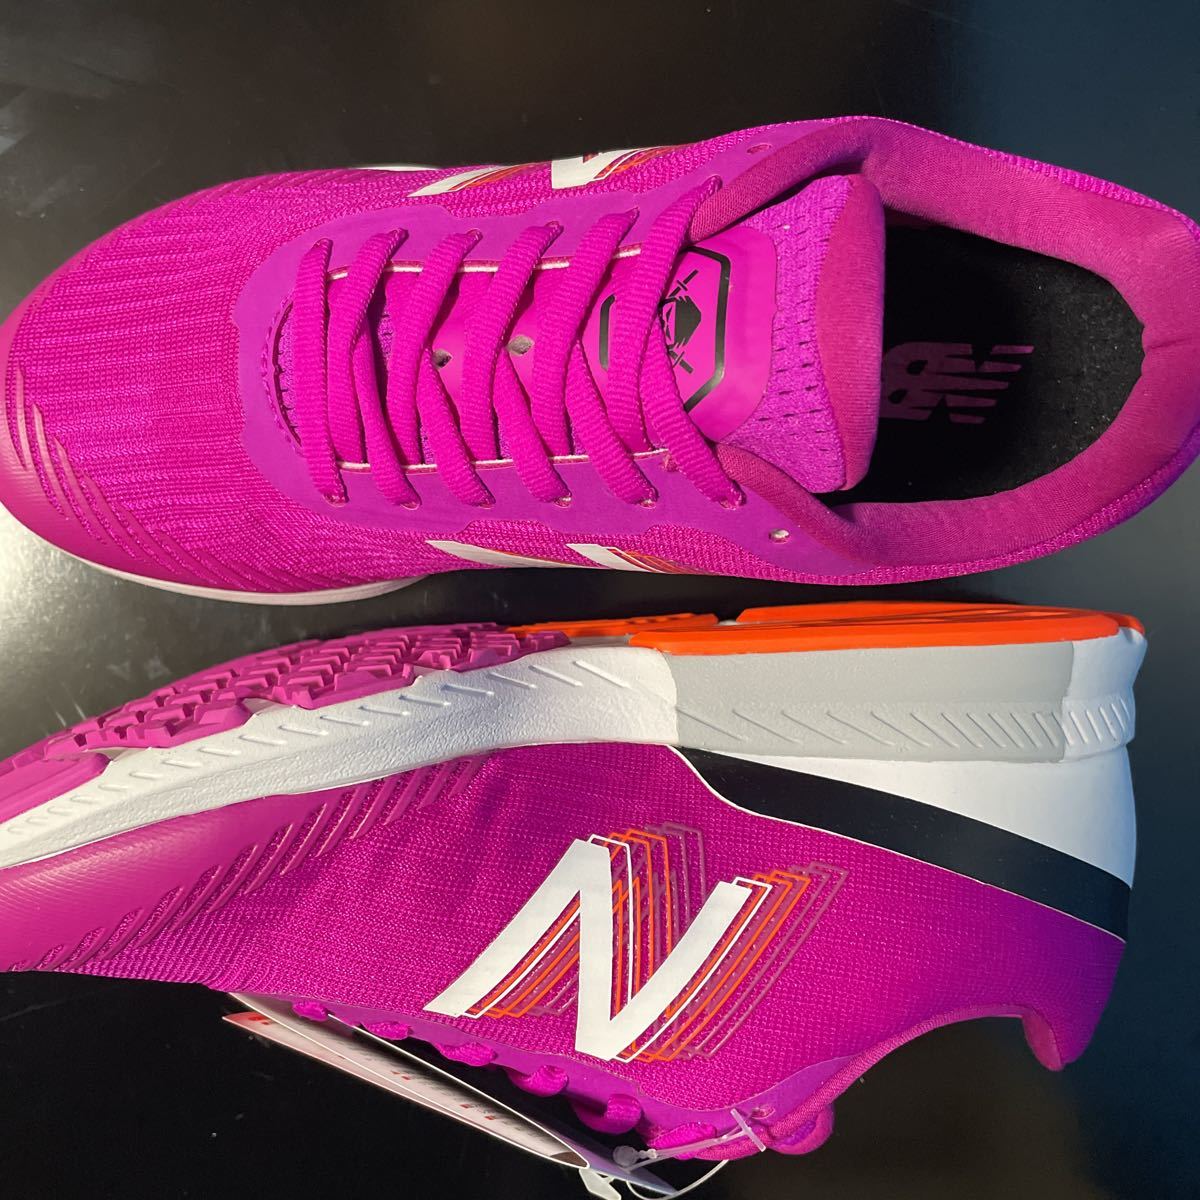 23.5cm* regular price 12100 jpy * New balance NB HANZO T W P3 handle zo- lady's running shoes pink sneakers training WHANZTP3